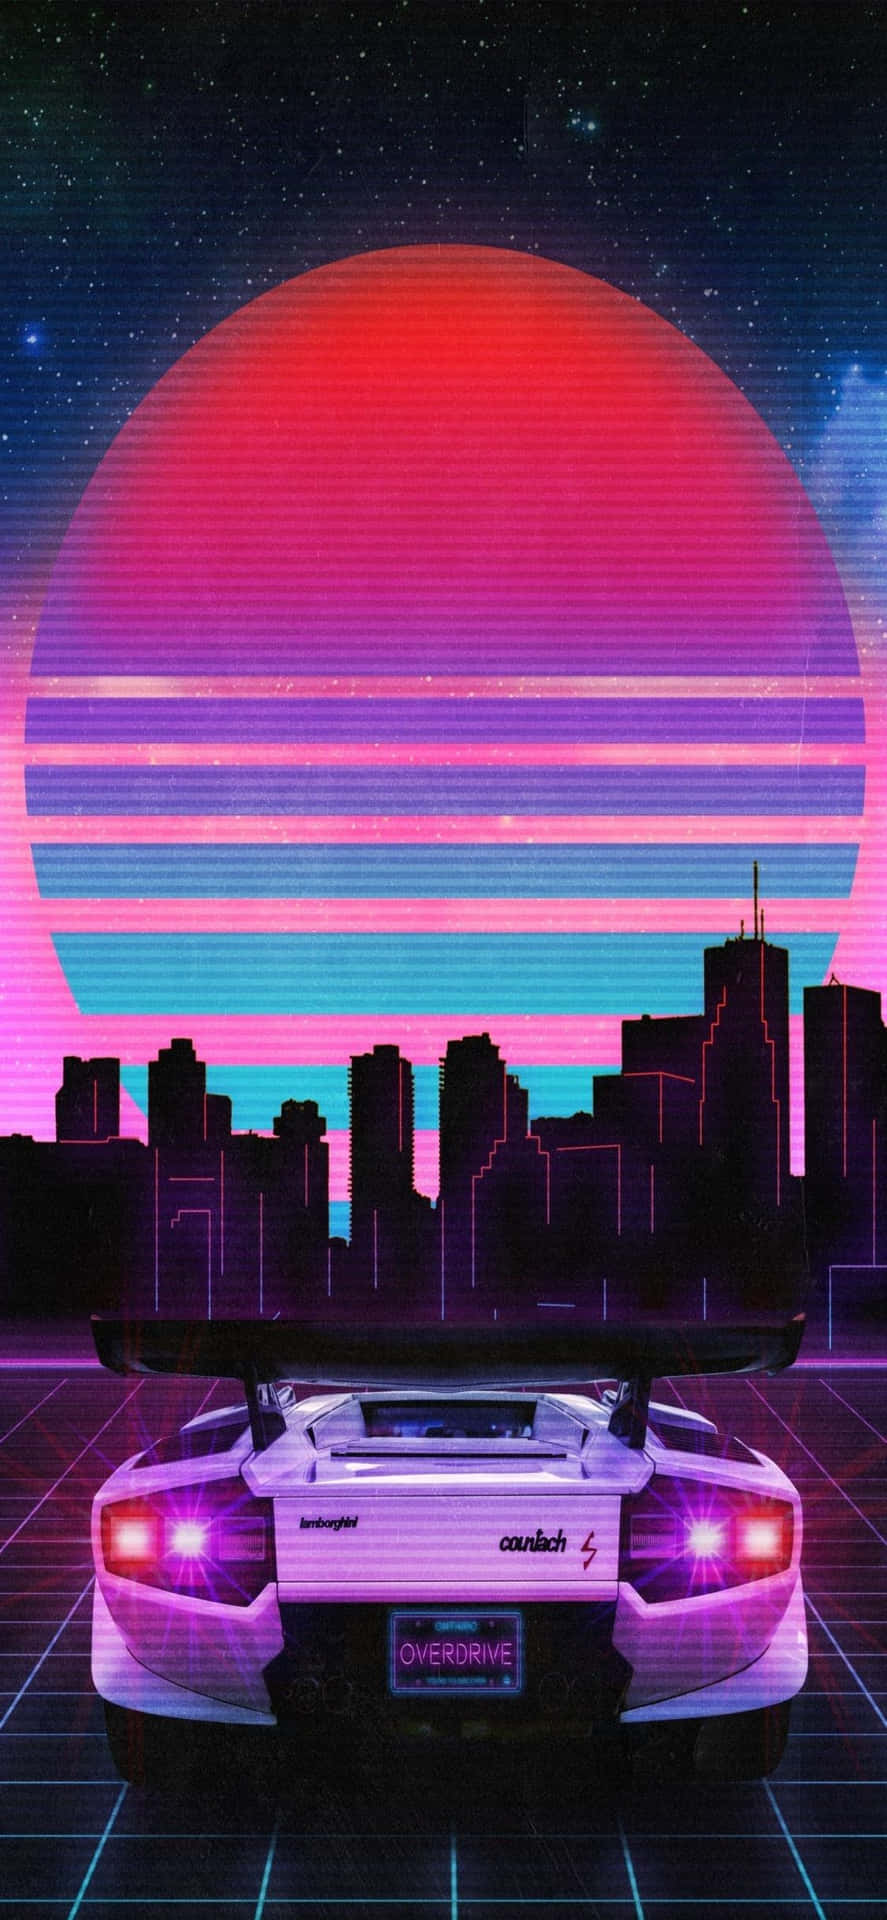 A Throwback To 90s Tech With This Retro Iphone. Background